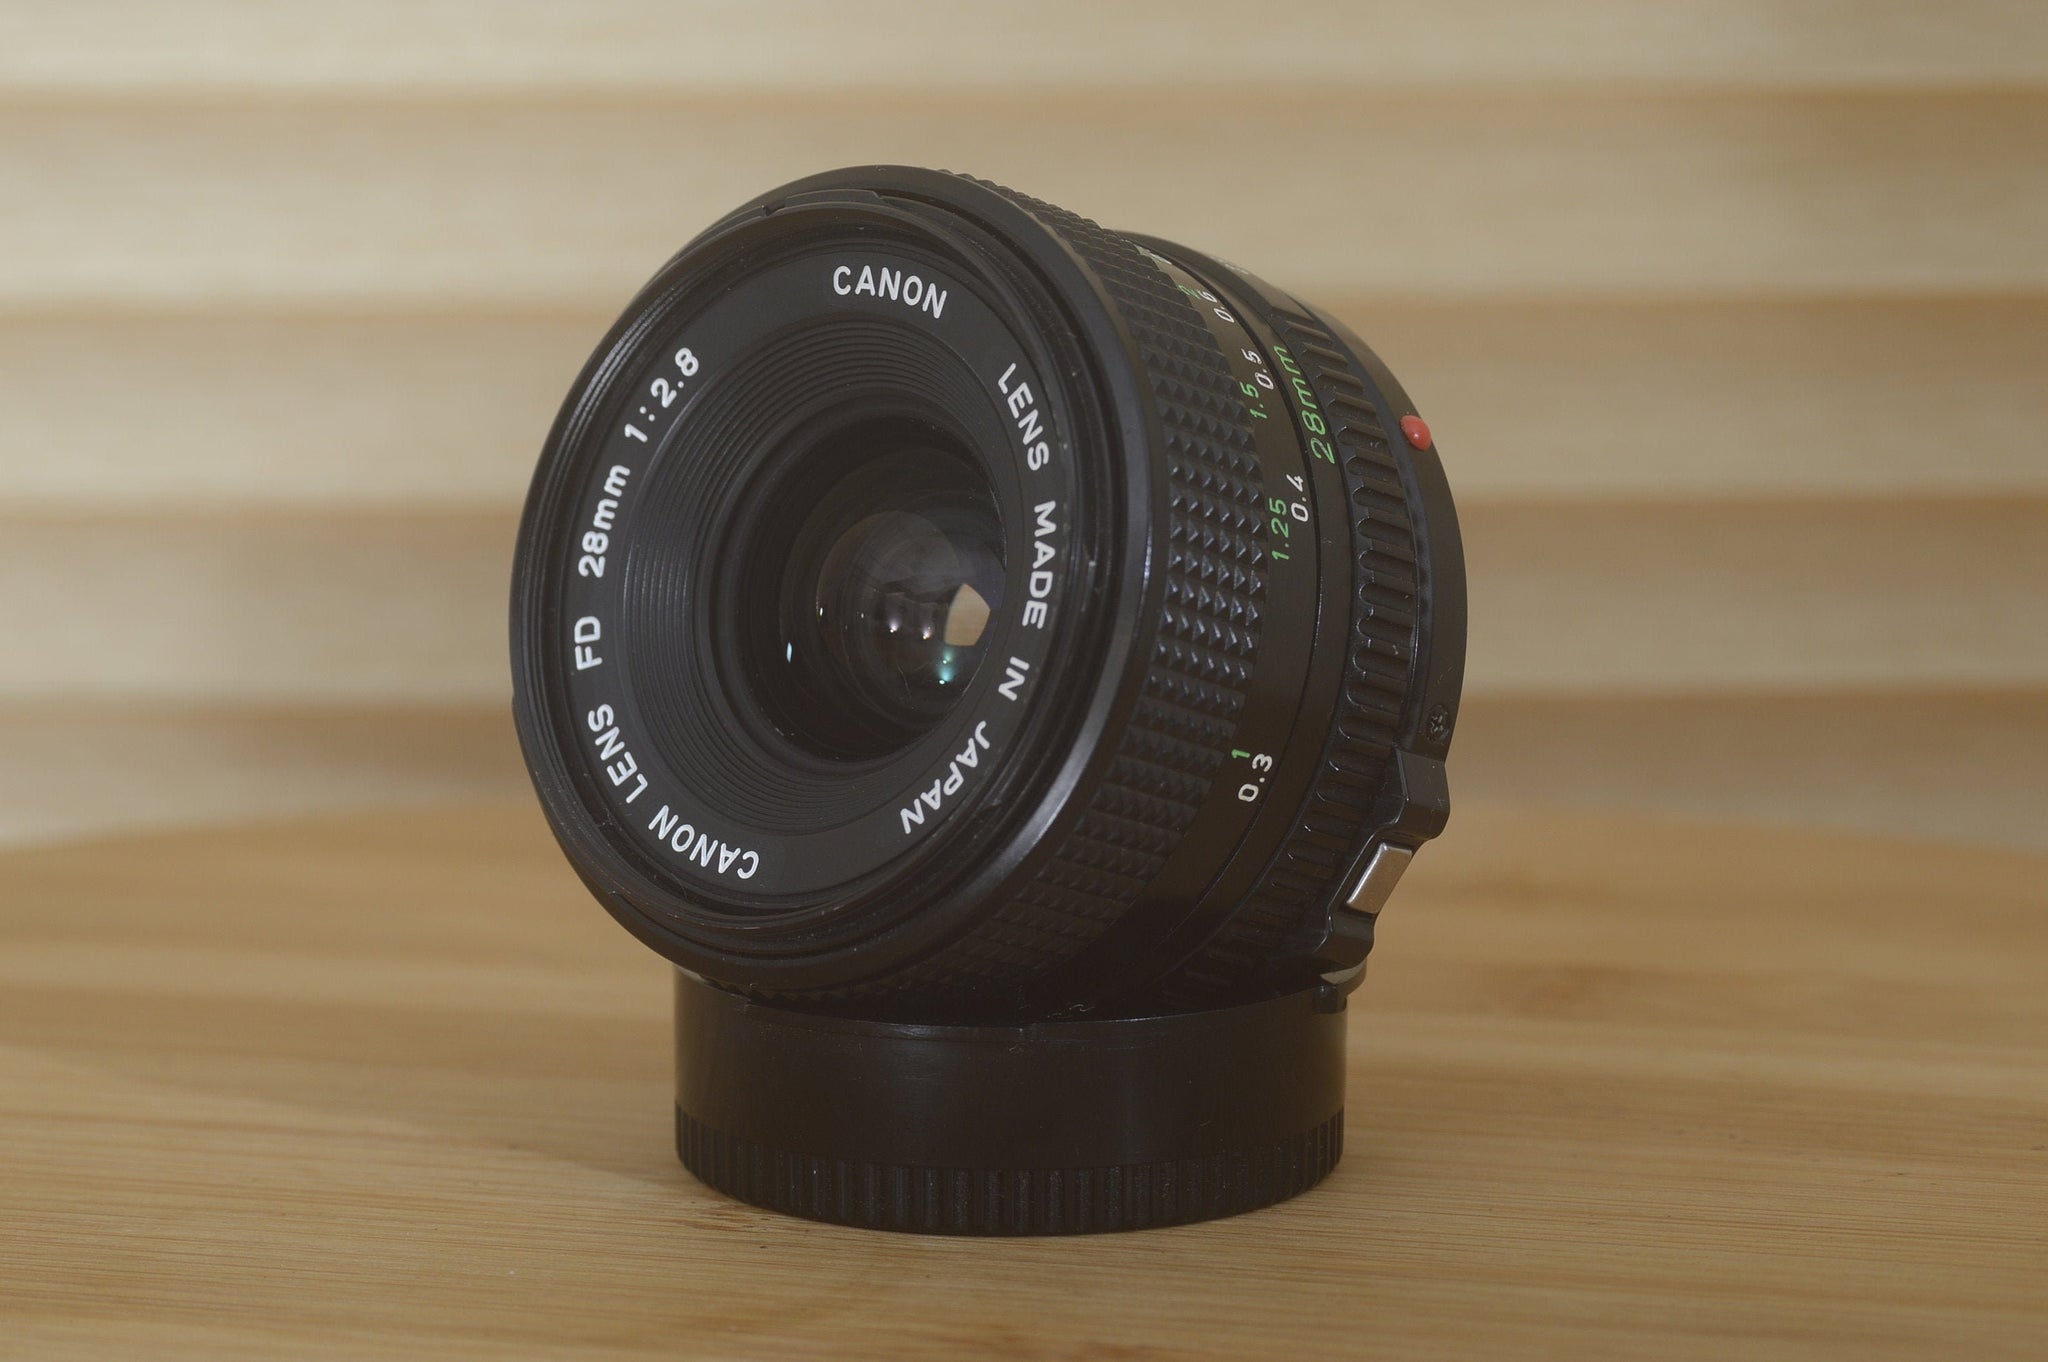 Canon FD 28mm f2.8 lens. This is a lovely wide angle lens in